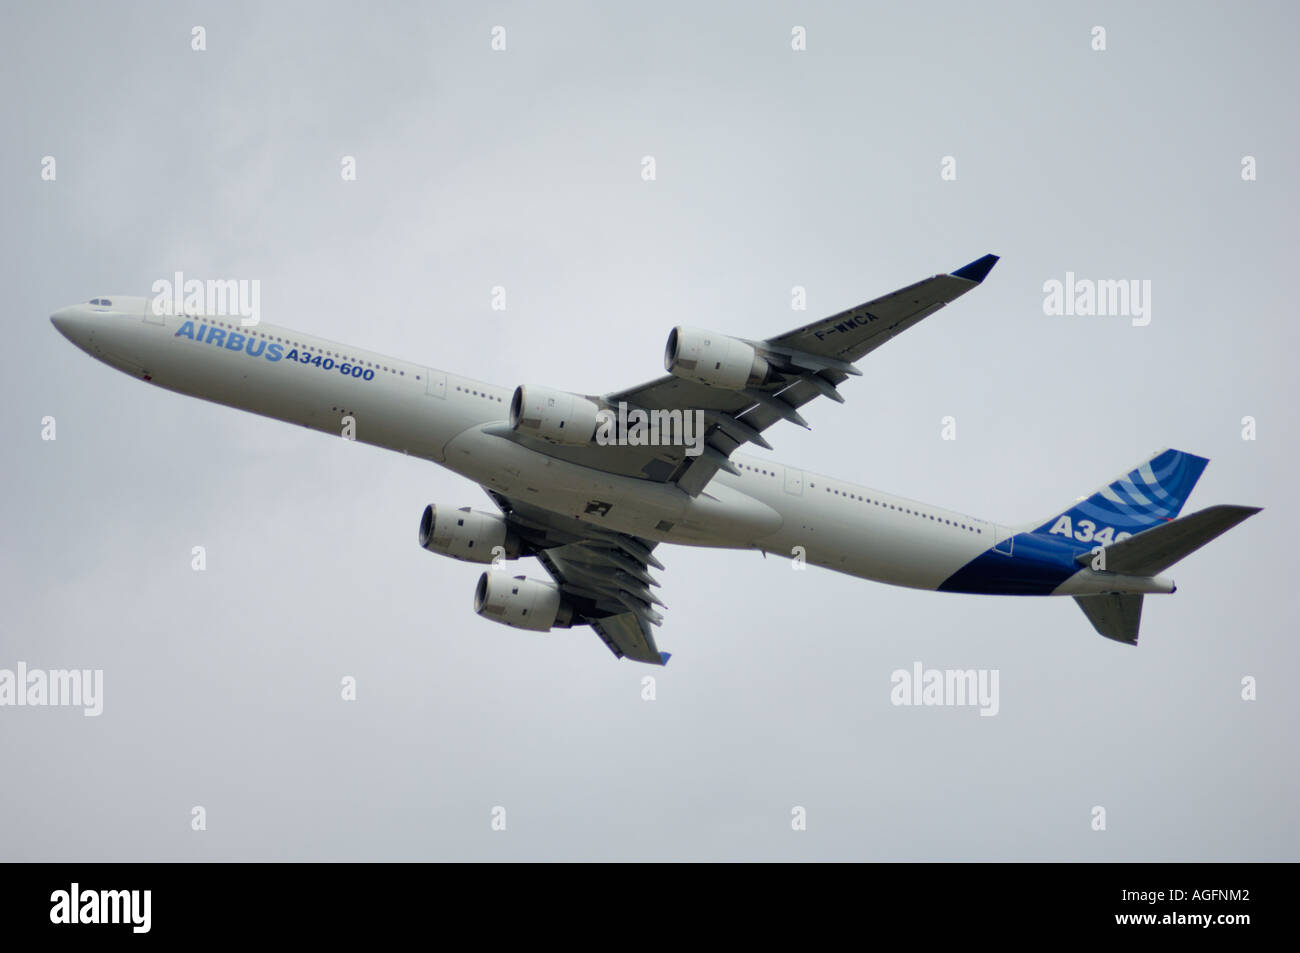 A side-view of an Airbus A340-600 taking off, flying in the air. Stock Photo